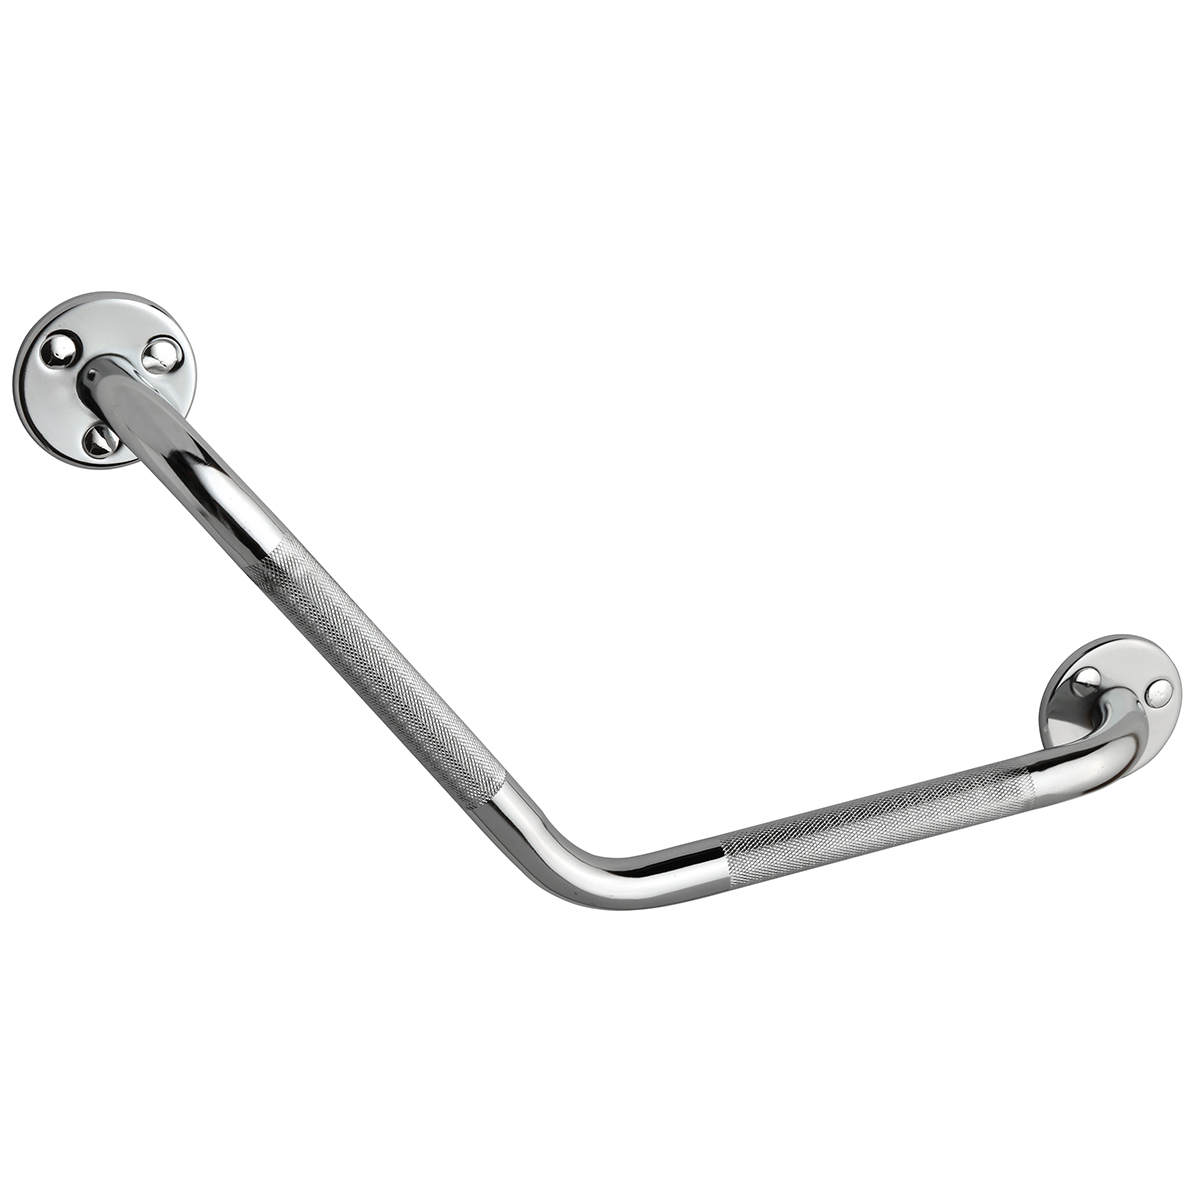 Grab Bars - Exposed Mount 135° Angled Grab Bar, Knurled 1" Diameter - 12" - Polished Stainless Steel